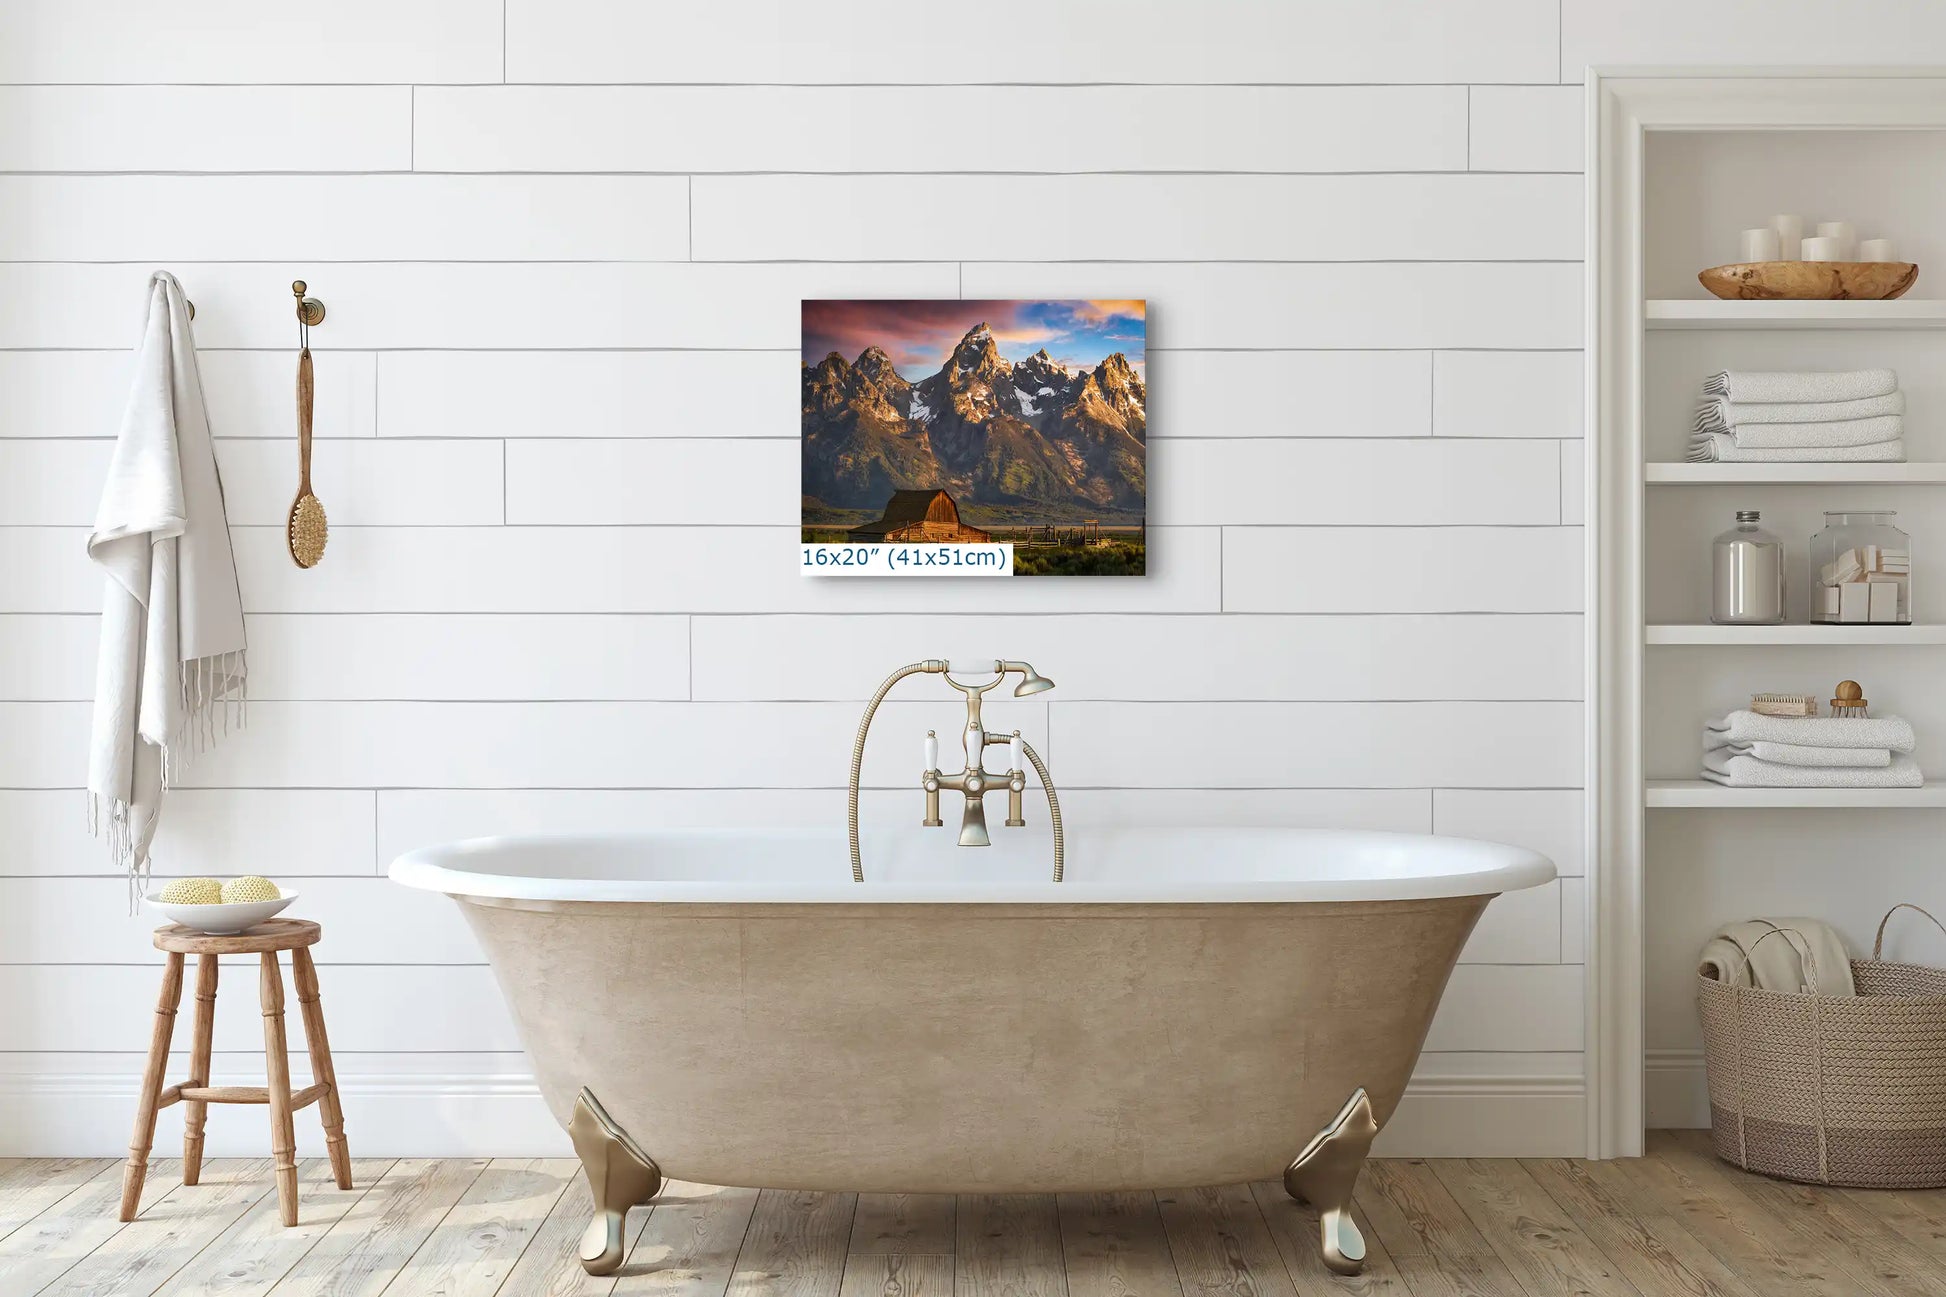 A 16x20 canvas print above a bathtub, depicting the John Moulton Homestead with the Teton Mountains at sunrise, creating a tranquil bathroom ambiance.